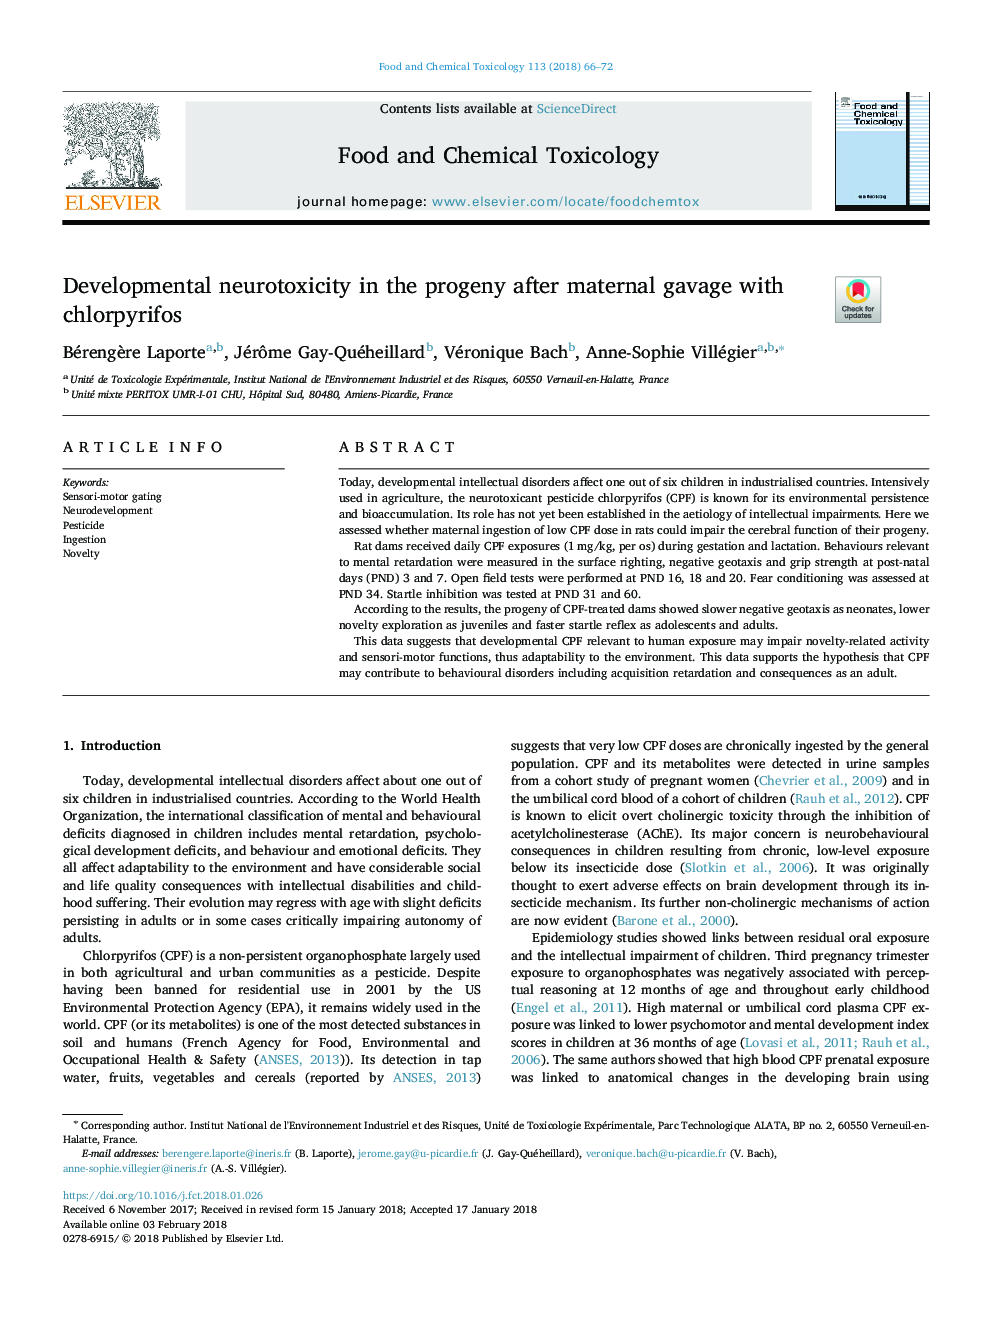 Developmental neurotoxicity in the progeny after maternal gavage with chlorpyrifos